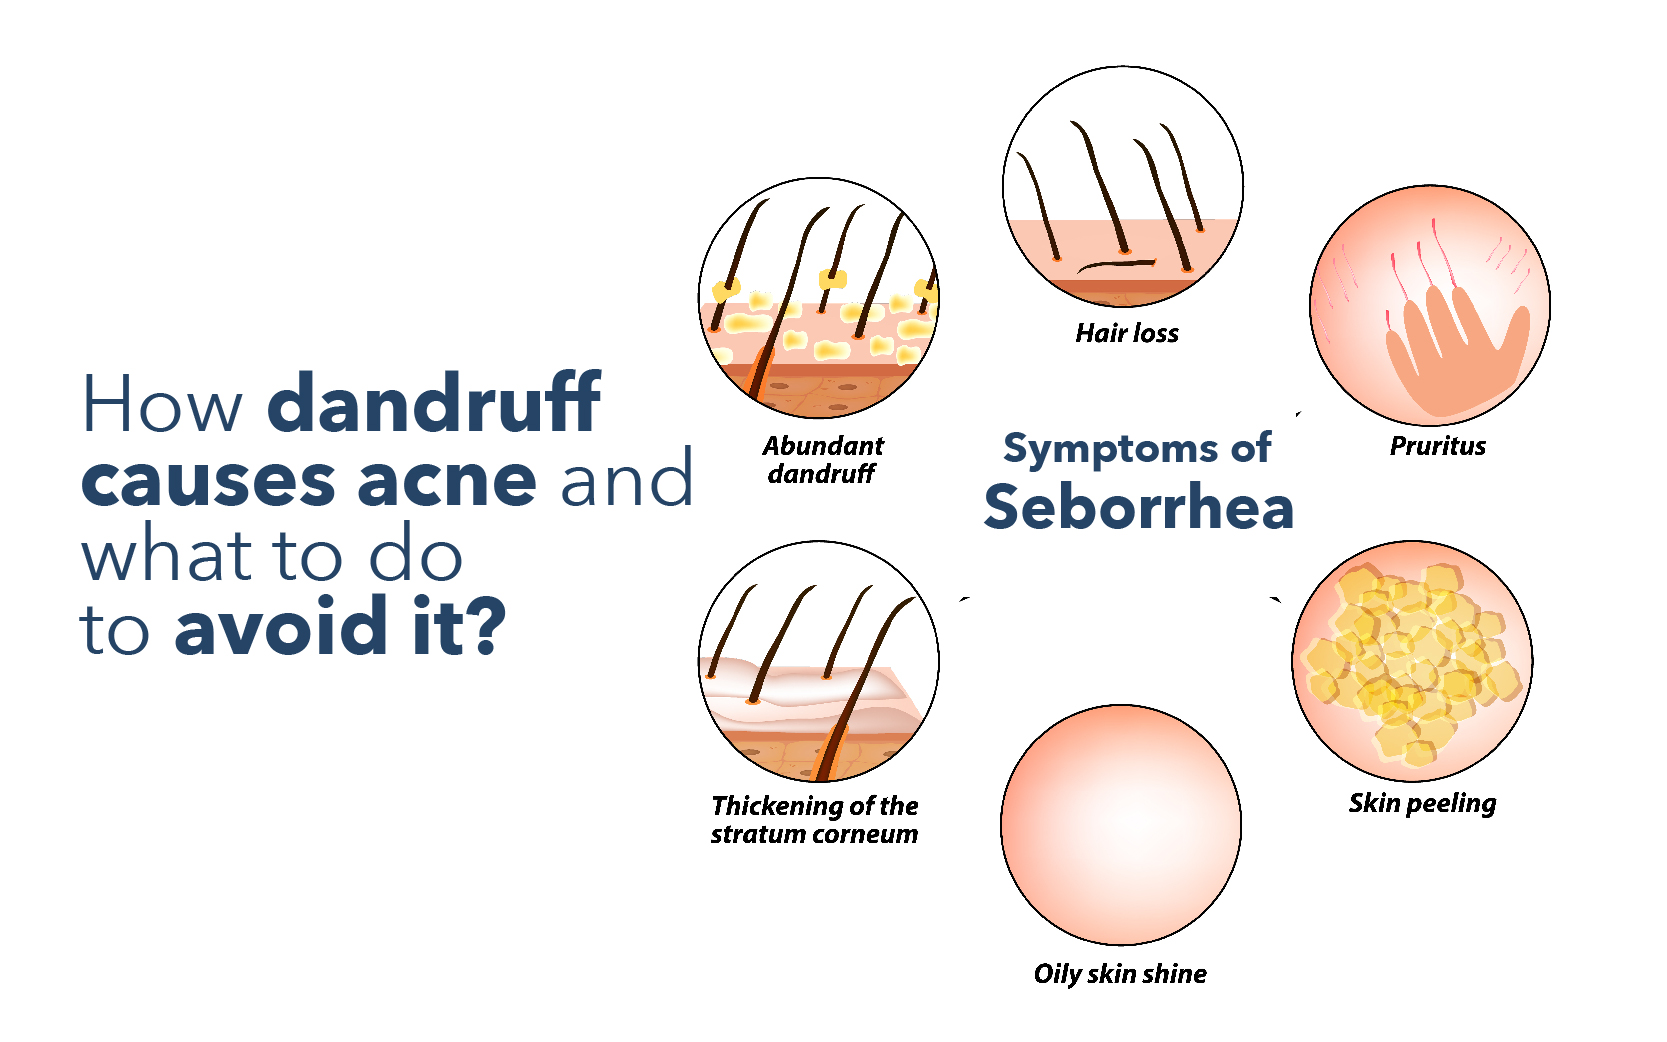 How Dandruff Causes Acne and What to Do to Avoid It